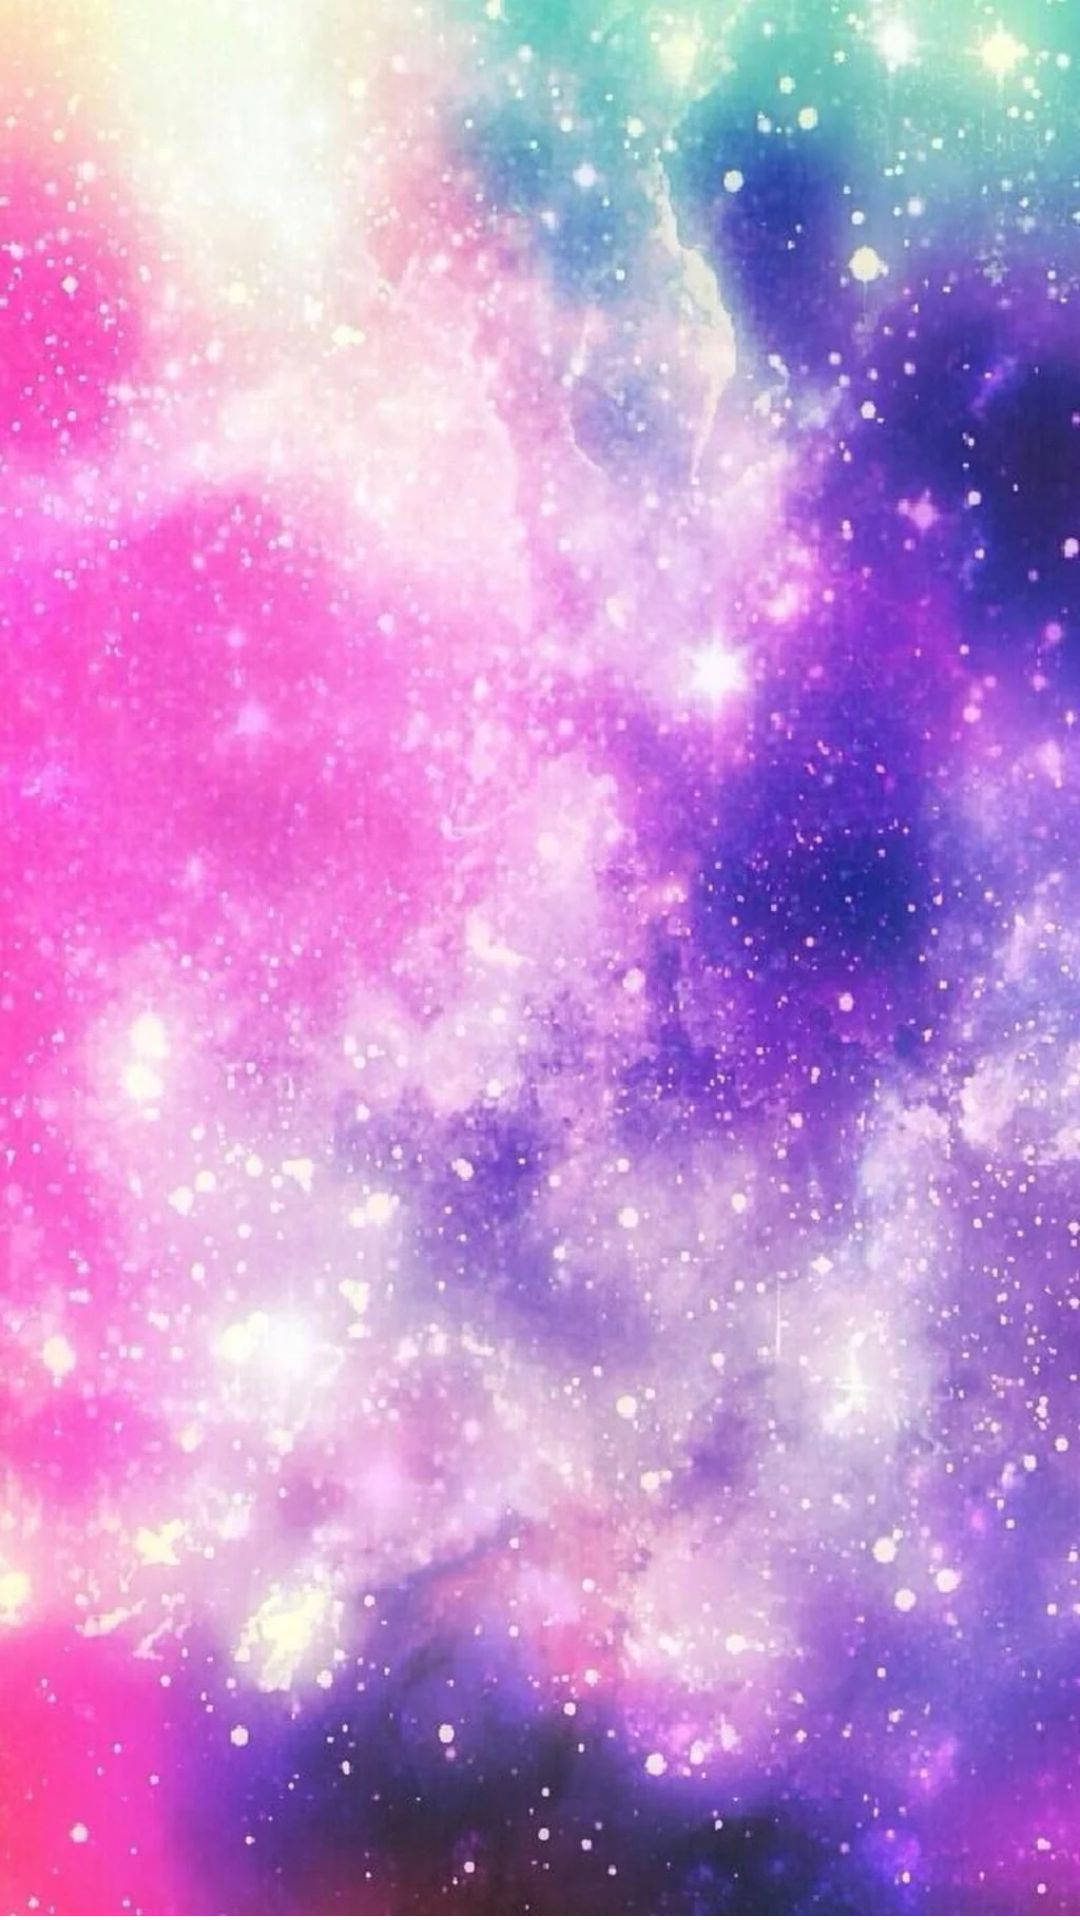 Vibrant Stars In A Cute Galaxy Background